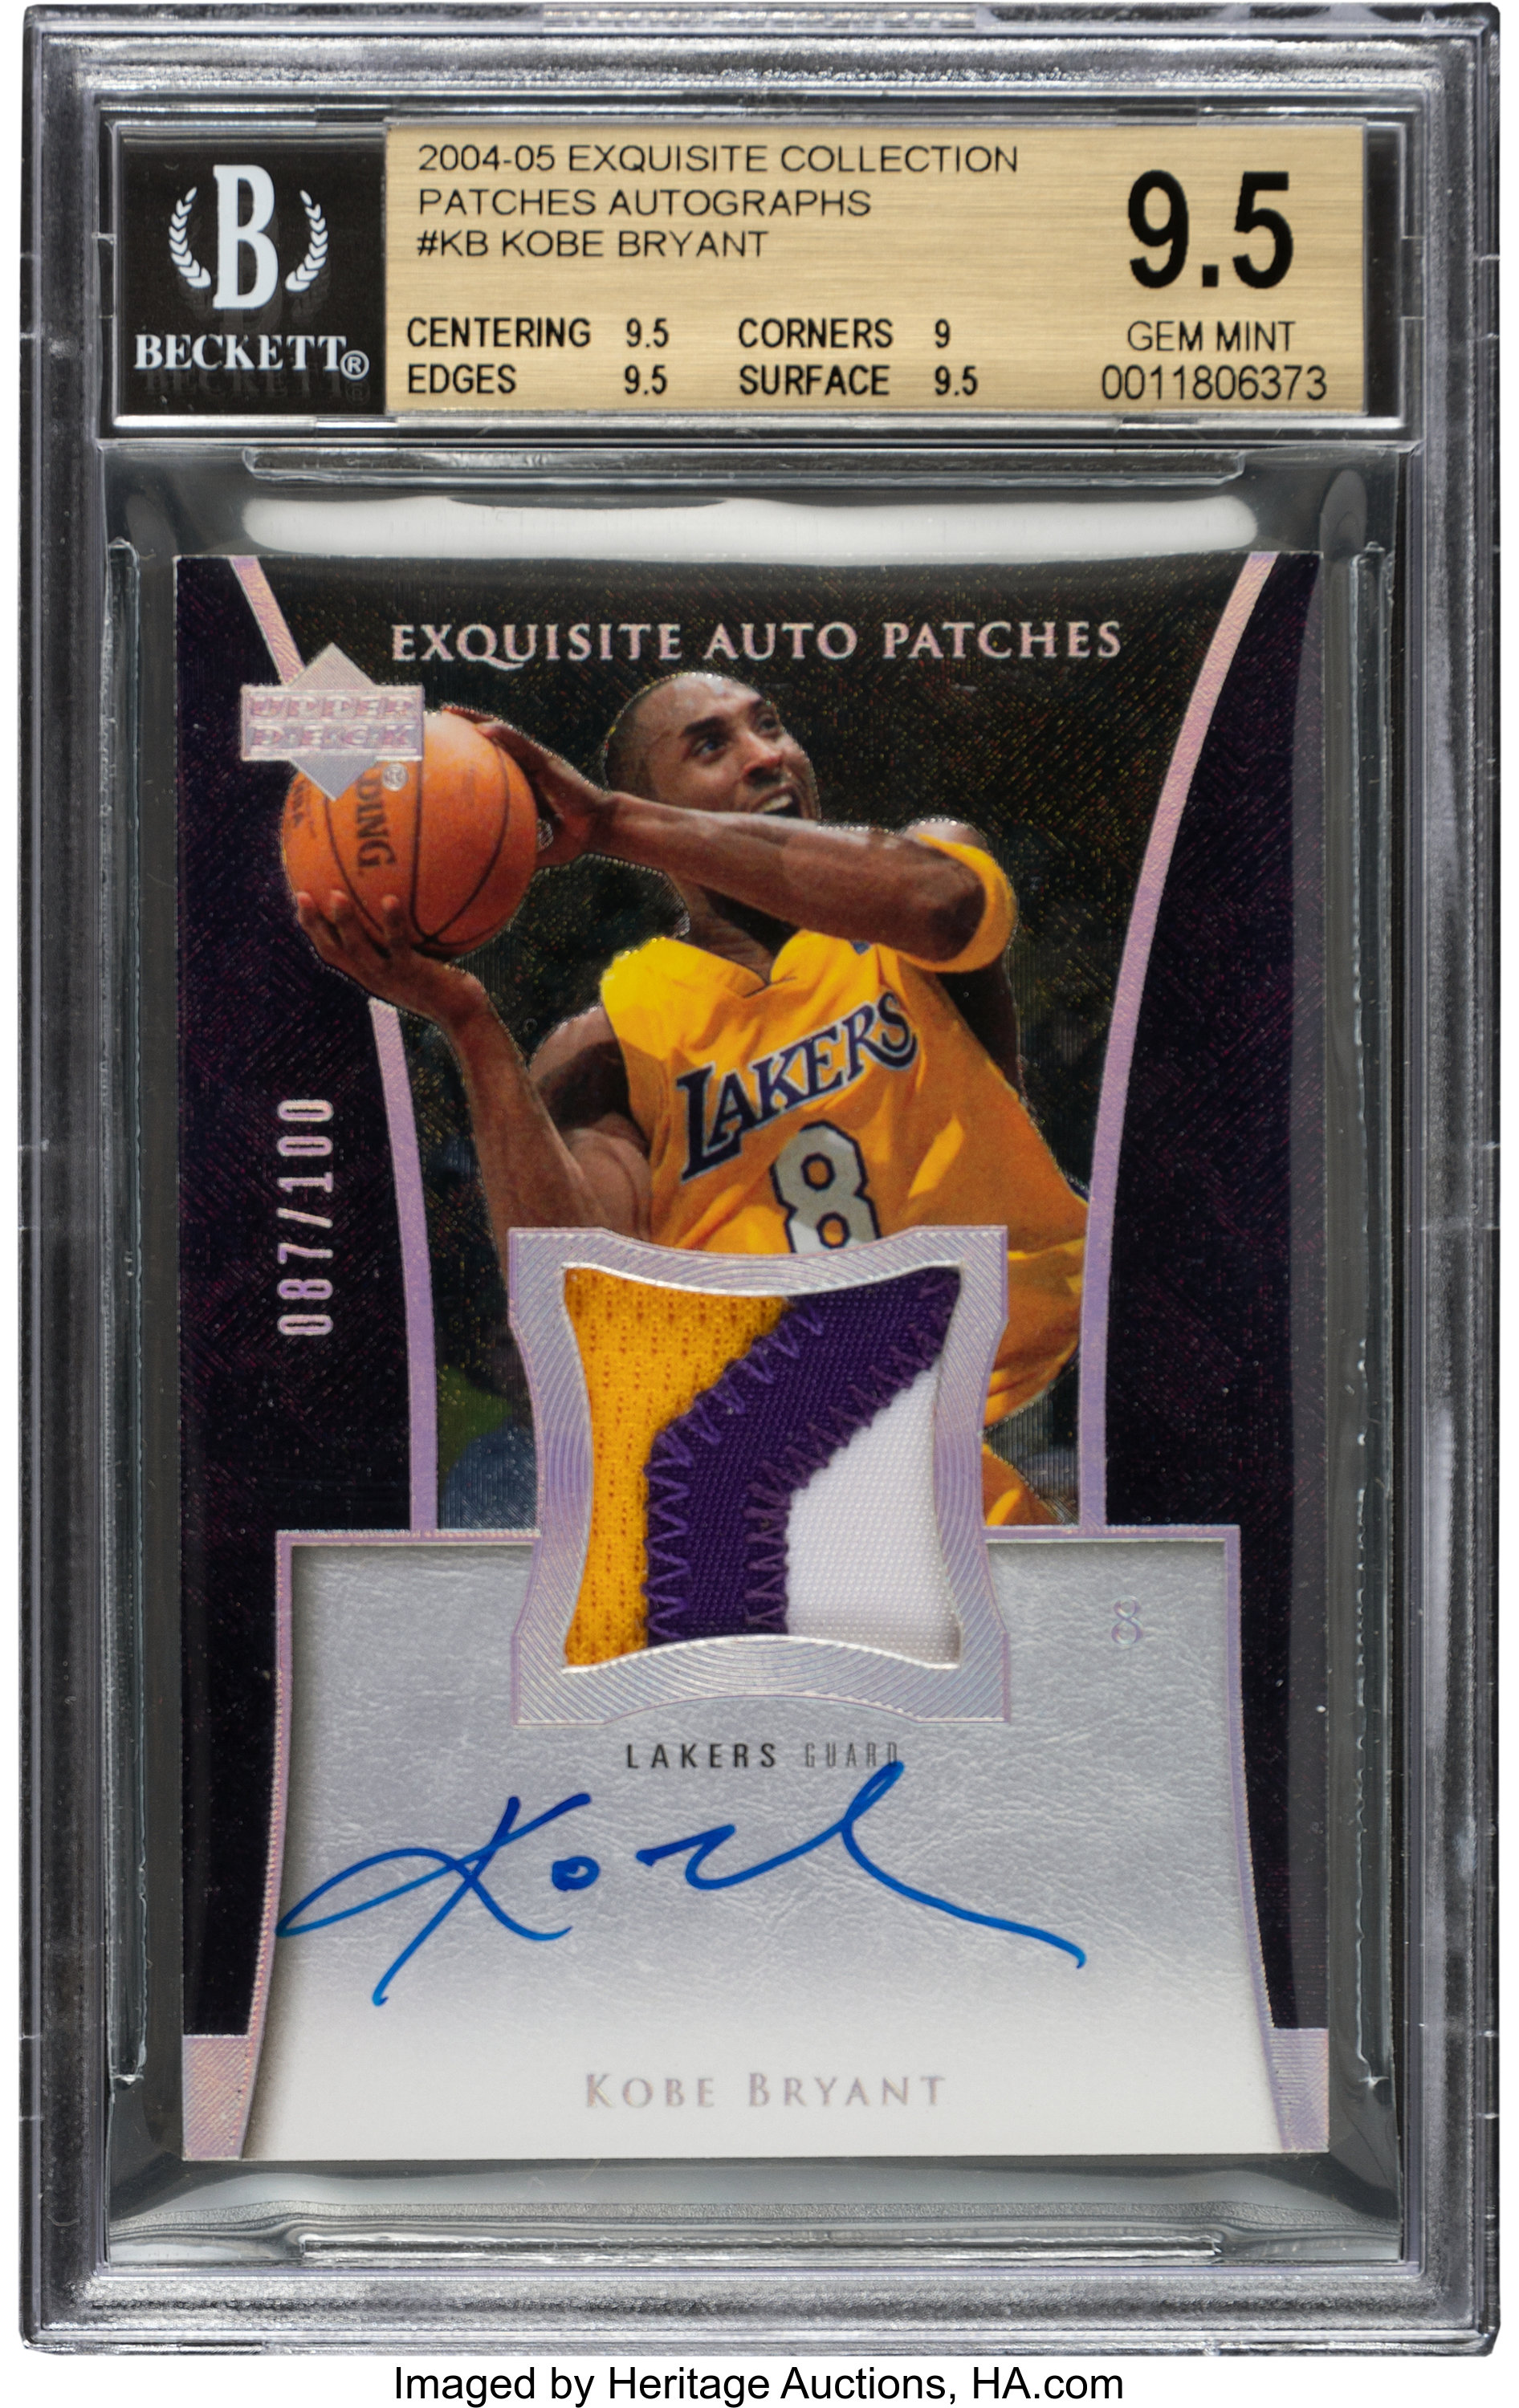 2004-05 Upper Deck Exquisite Collection Kobe Bryant Patches | Lot ...